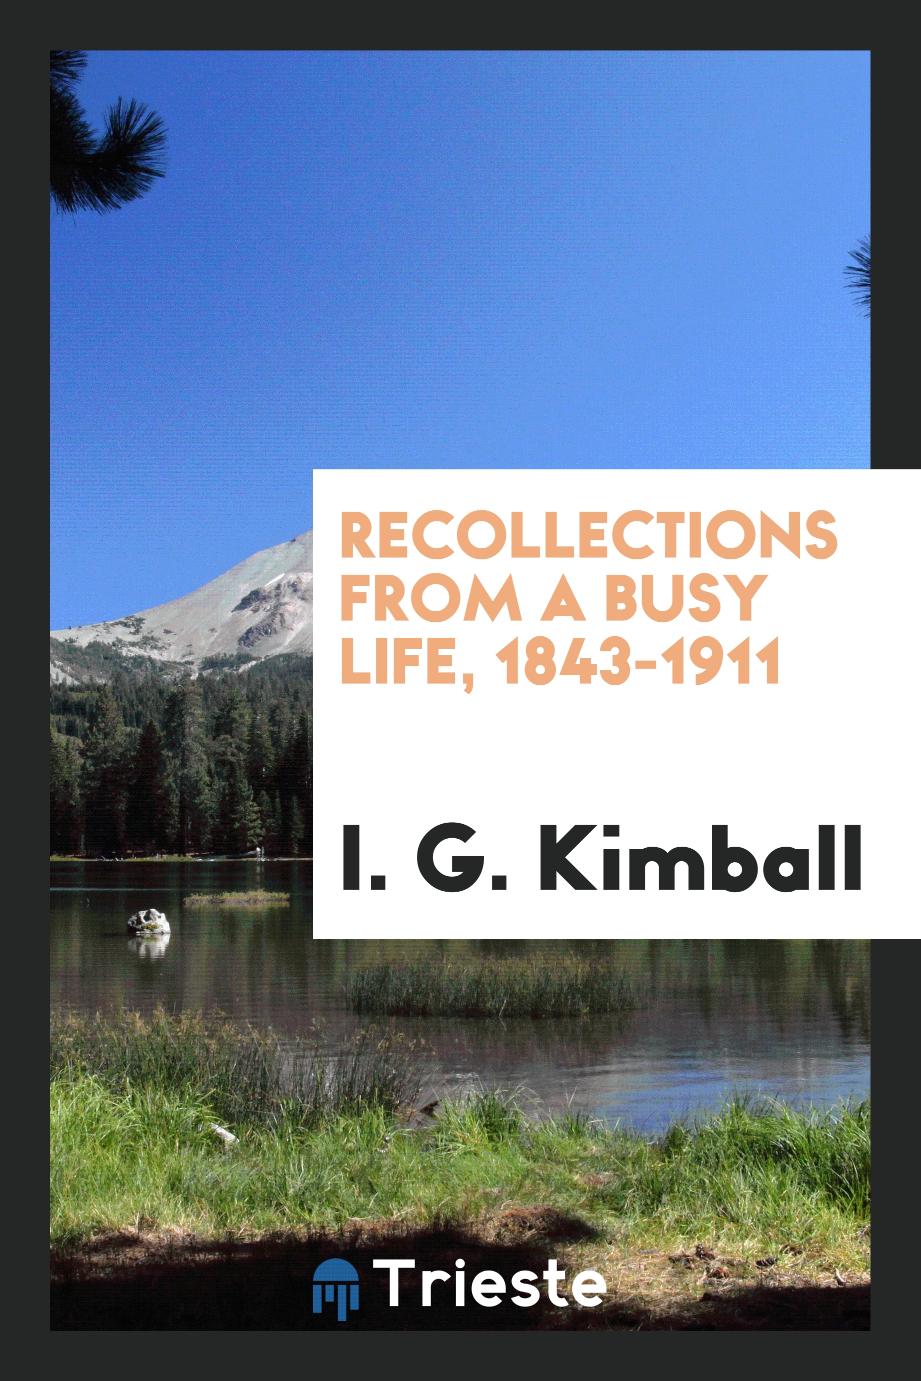 Recollections from a busy life, 1843-1911